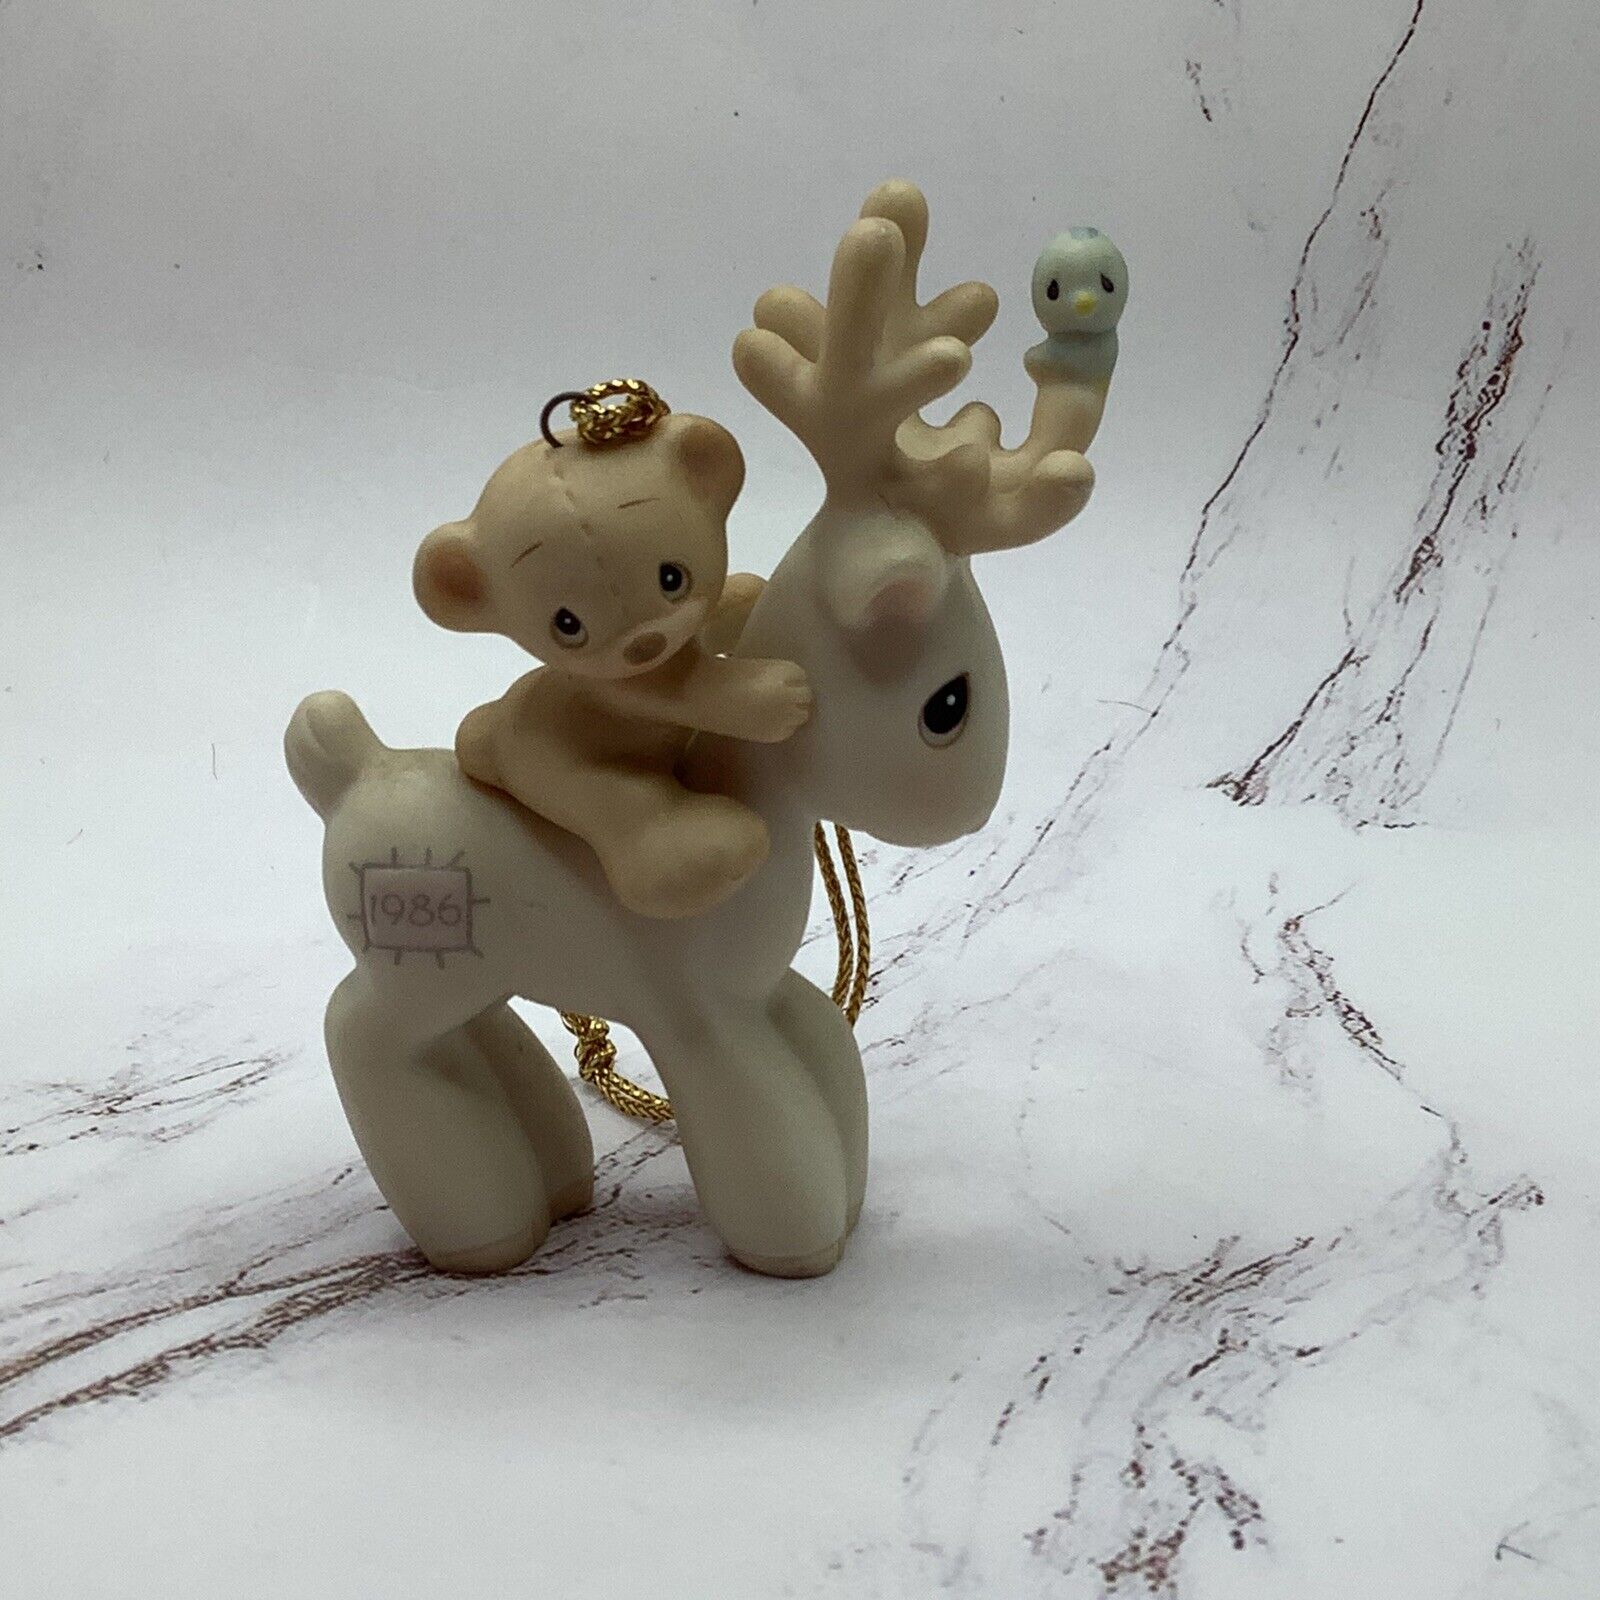 Vintage 1986 Precious Moments Special Issue #102466 Reindeer Ornament